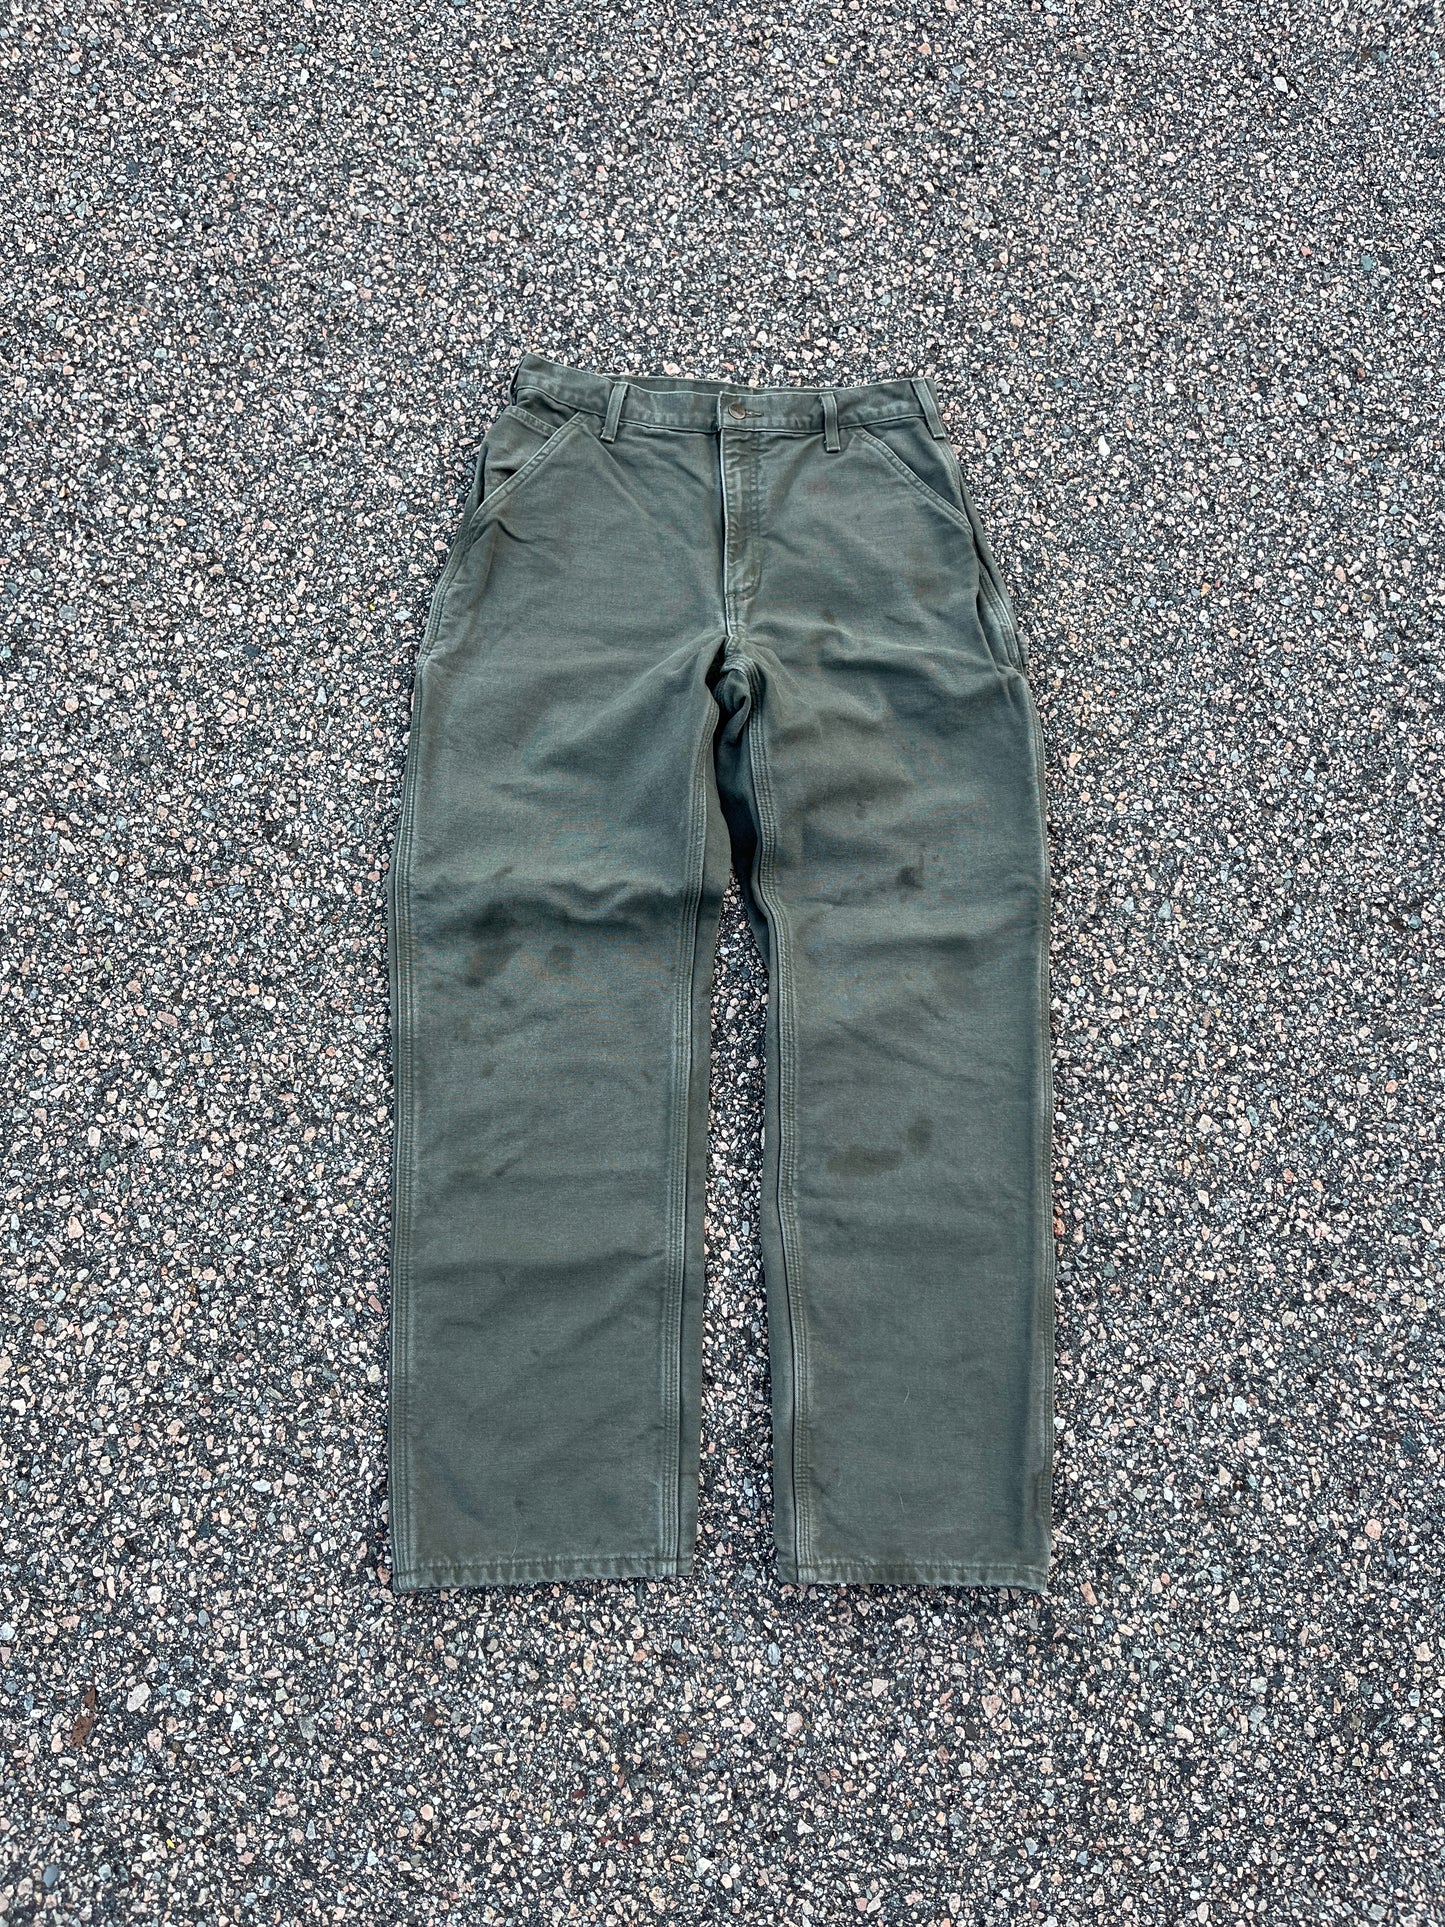 Faded Olive Green Carhartt Blanket Lined Carpenter Pants - 31 x 32